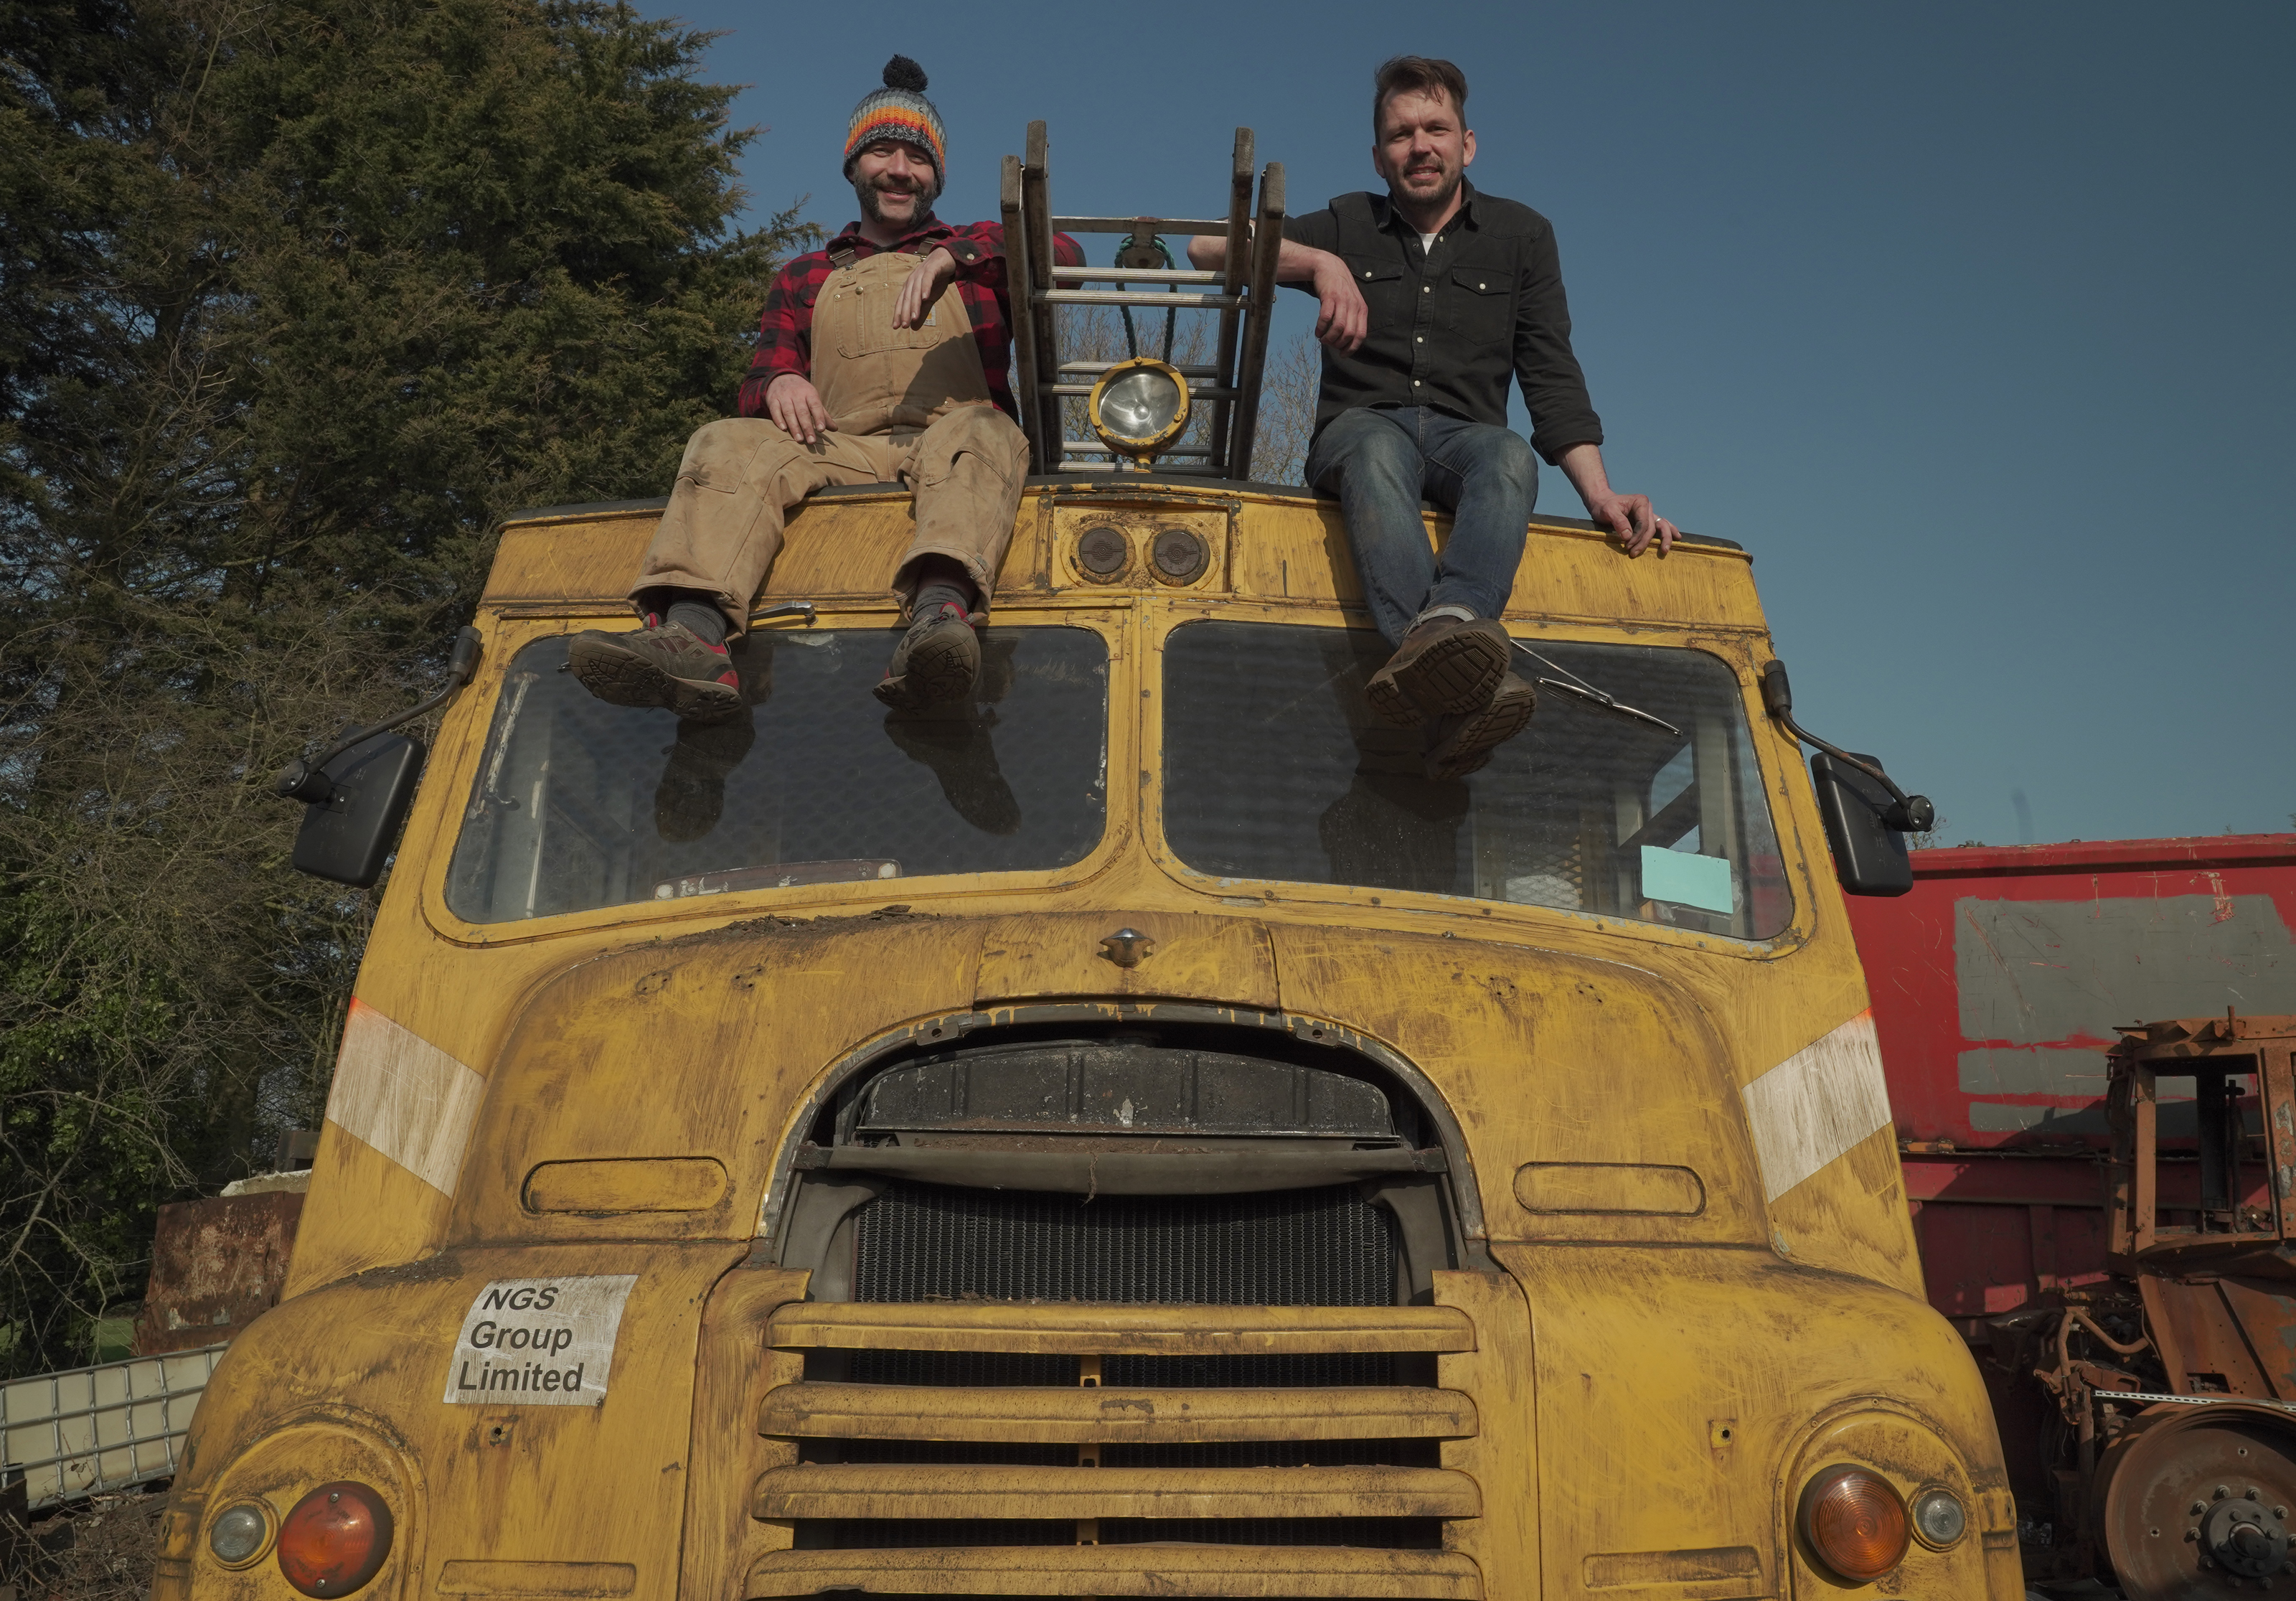 Jimmy Doherty and Jimmy de Ville in Jimmy Doherty's Dream Builds On Wheels